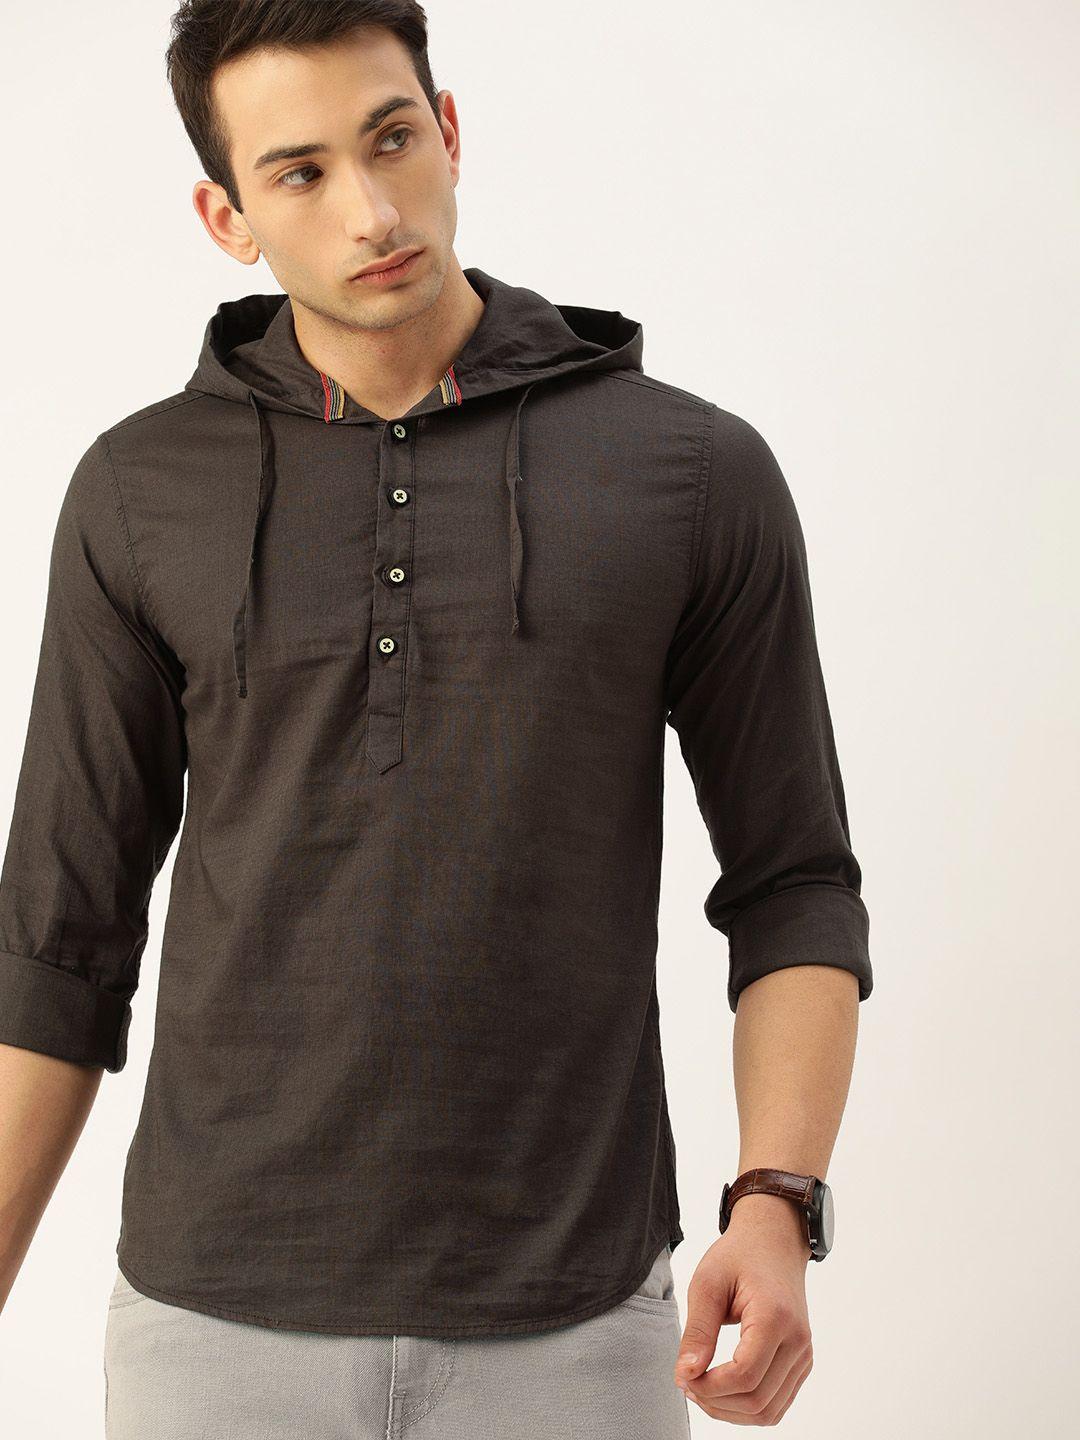 the indian garage co men charcoal grey slim fit solid casual hooded shirt